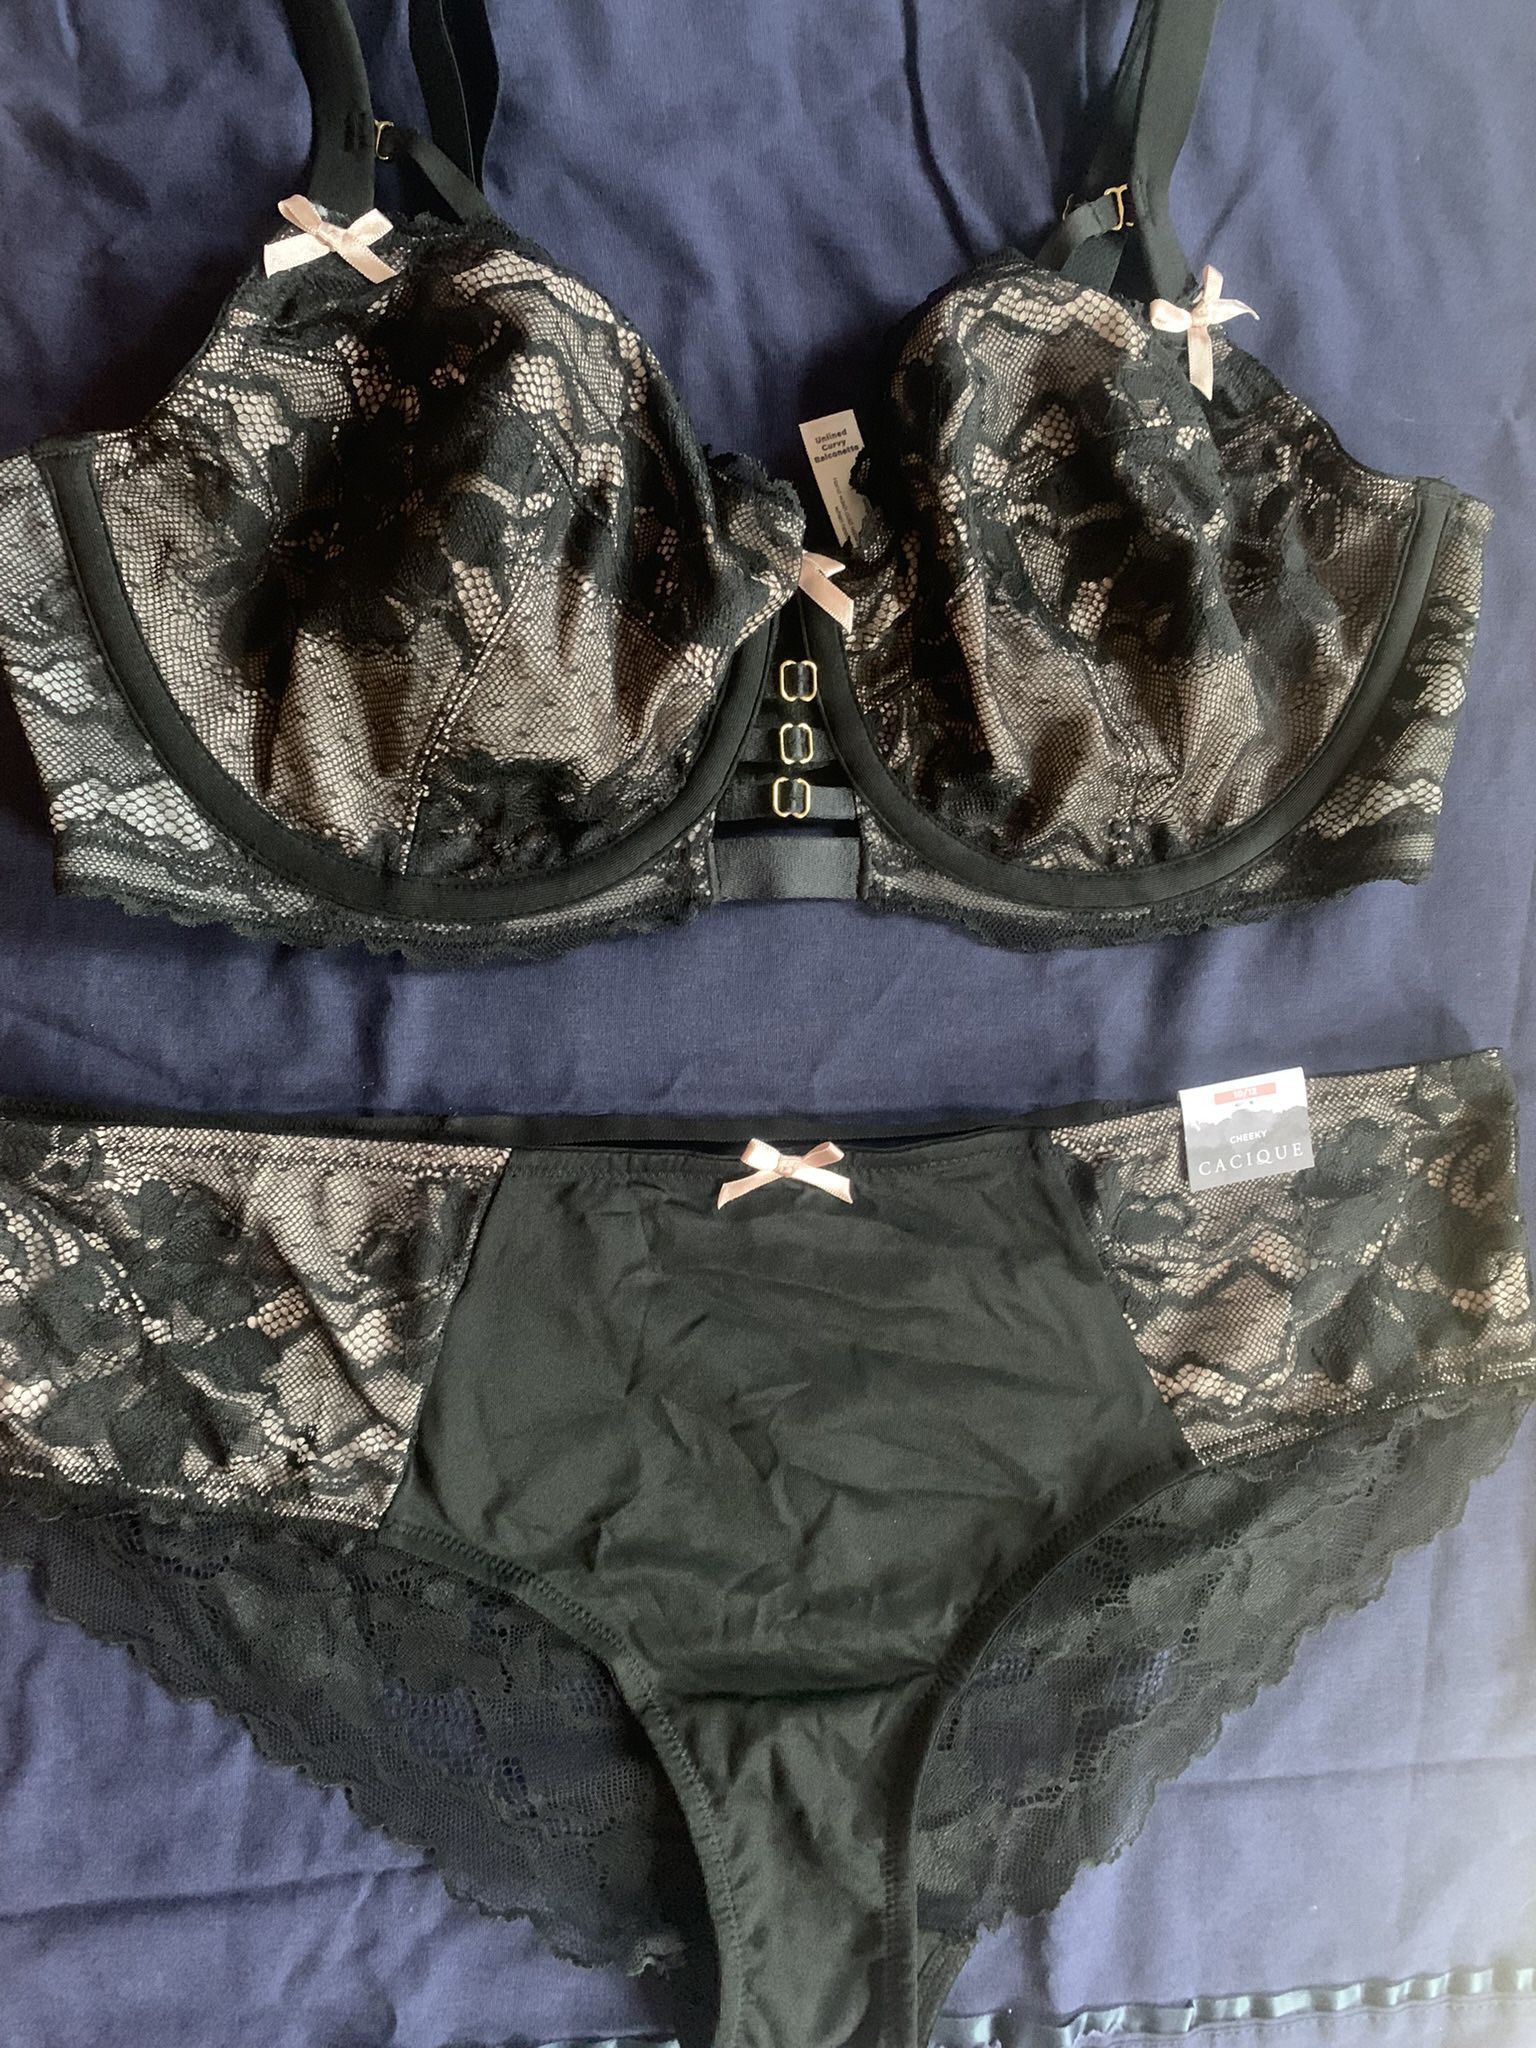 Cacique Lace Bra & Panty Set 38DD & 10/12 for Sale in Baltimore